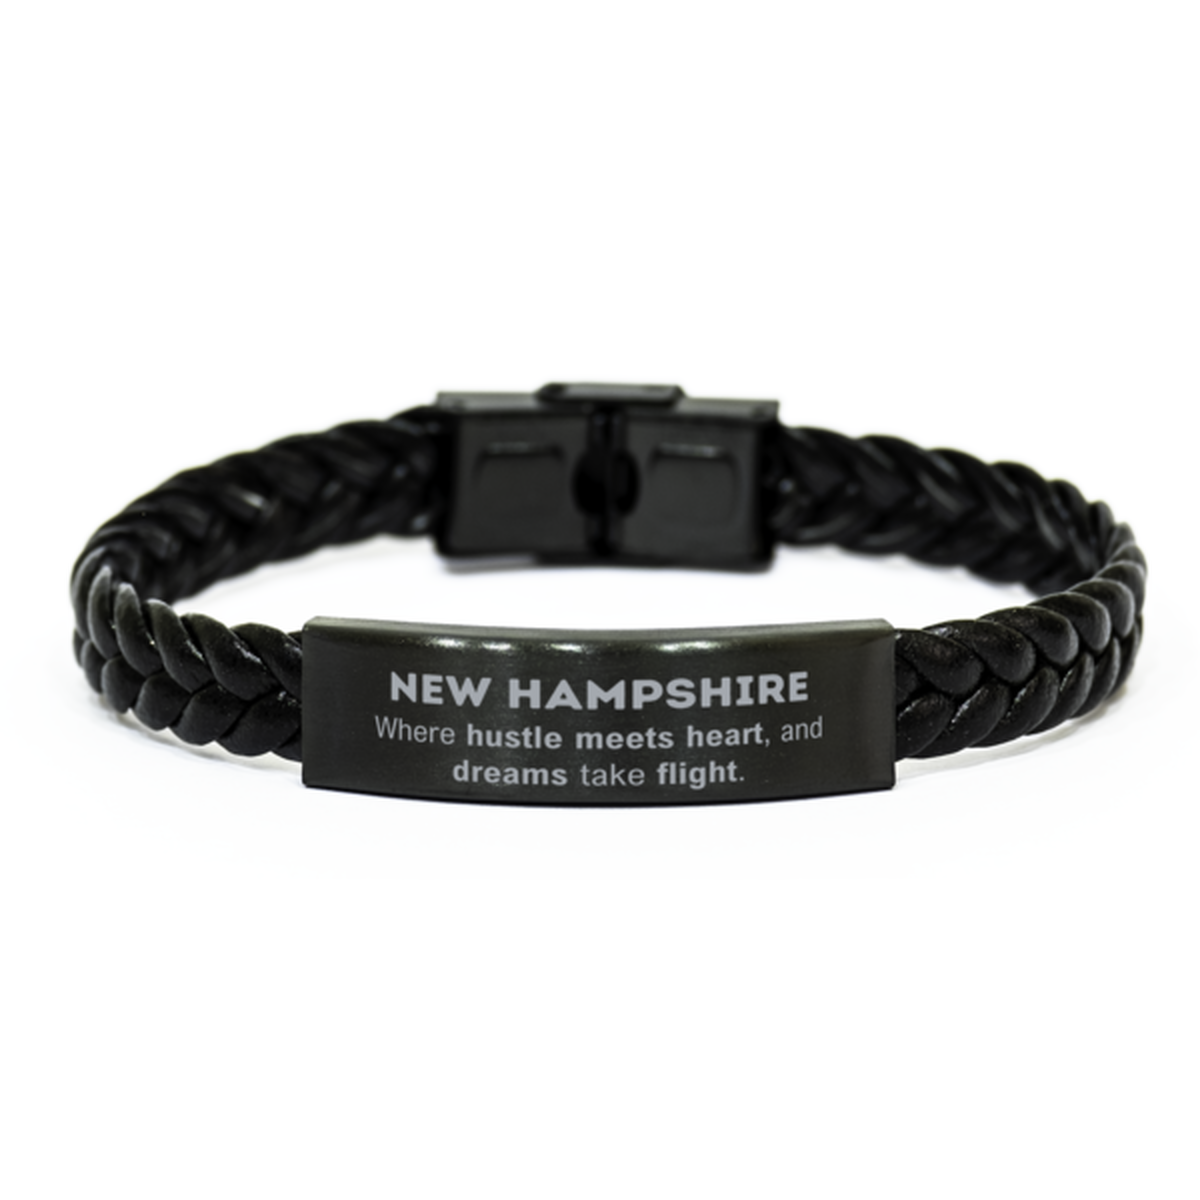 New Hampshire: Where hustle meets heart, and dreams take flight, New Hampshire Gifts, Proud New Hampshire Christmas Birthday New Hampshire Braided Leather Bracelet, New Hampshire State People, Men, Women, Friends